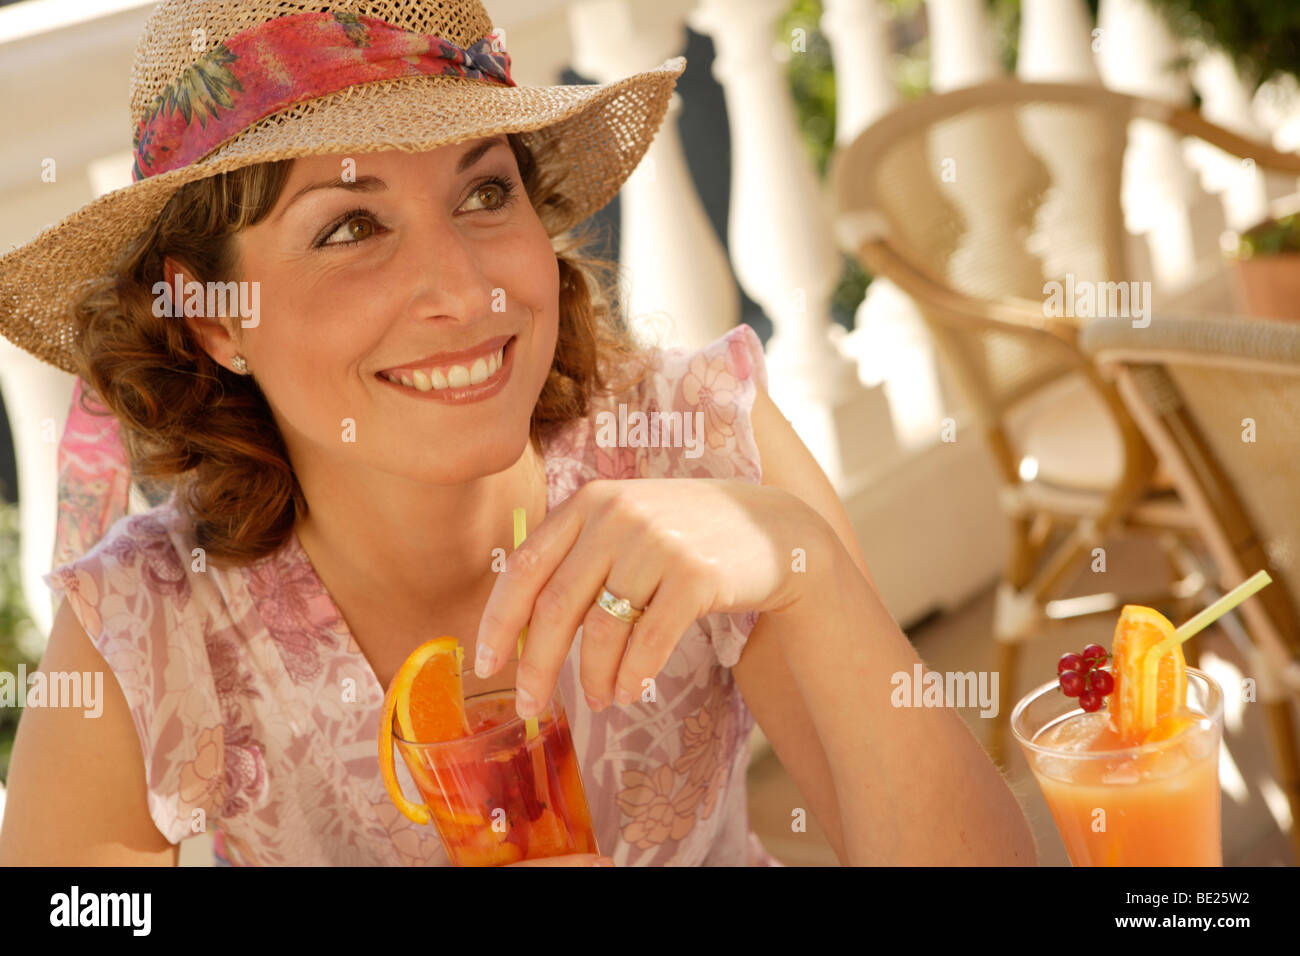 Smiling young woman with cocktail Banque D'Images